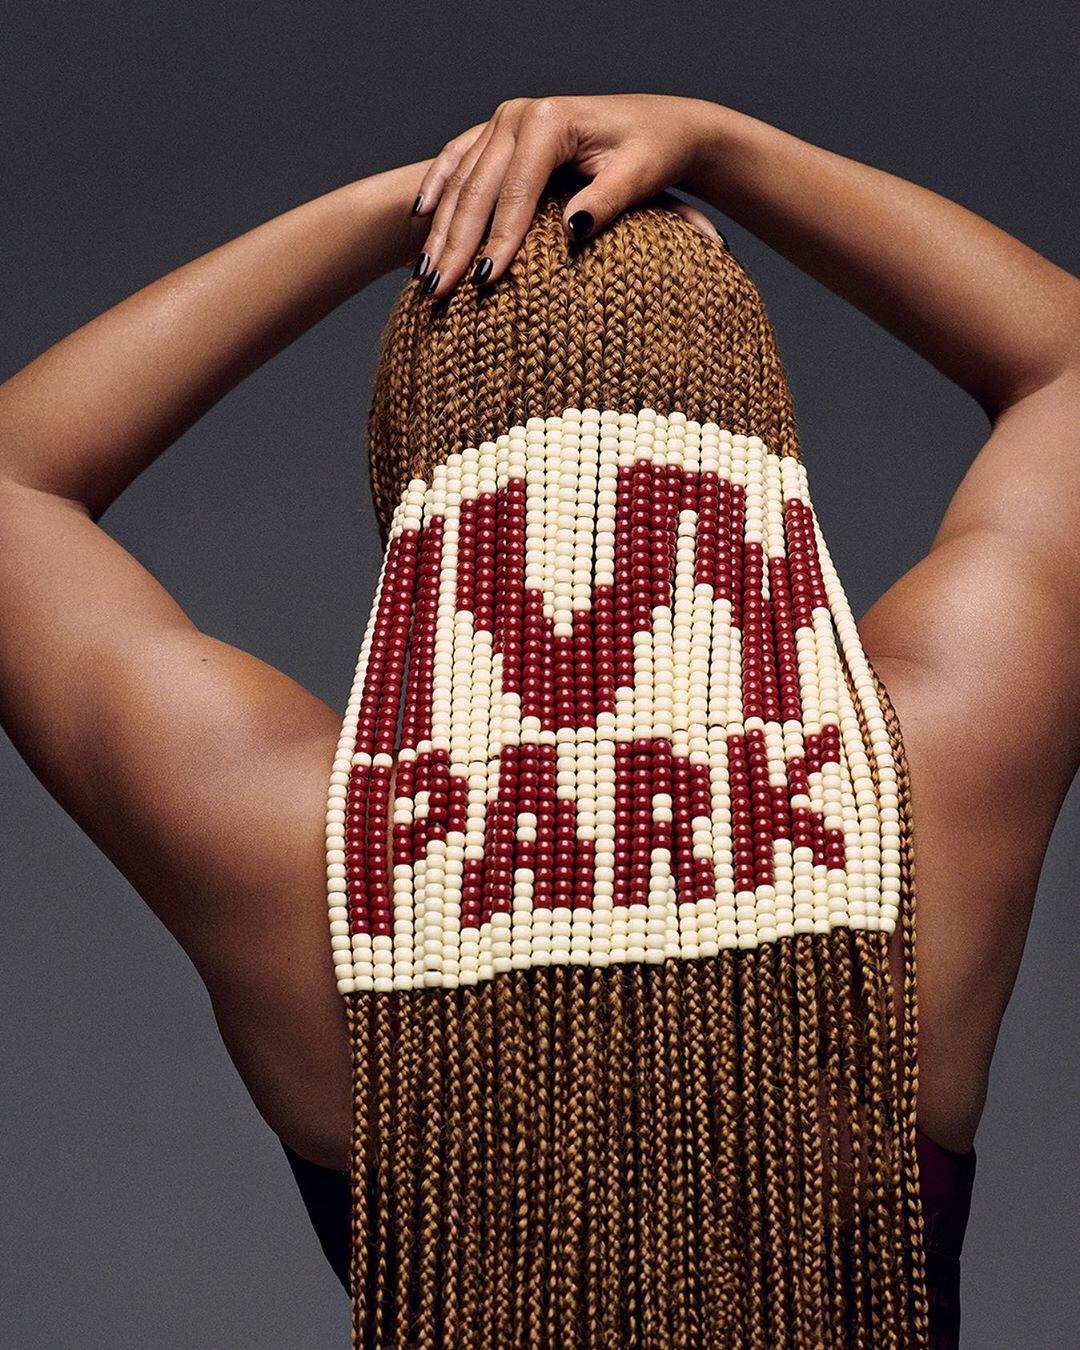 Beyoncé Shares New S3xy Photos In Promotion Of Her IVY Park Collection (Photos)